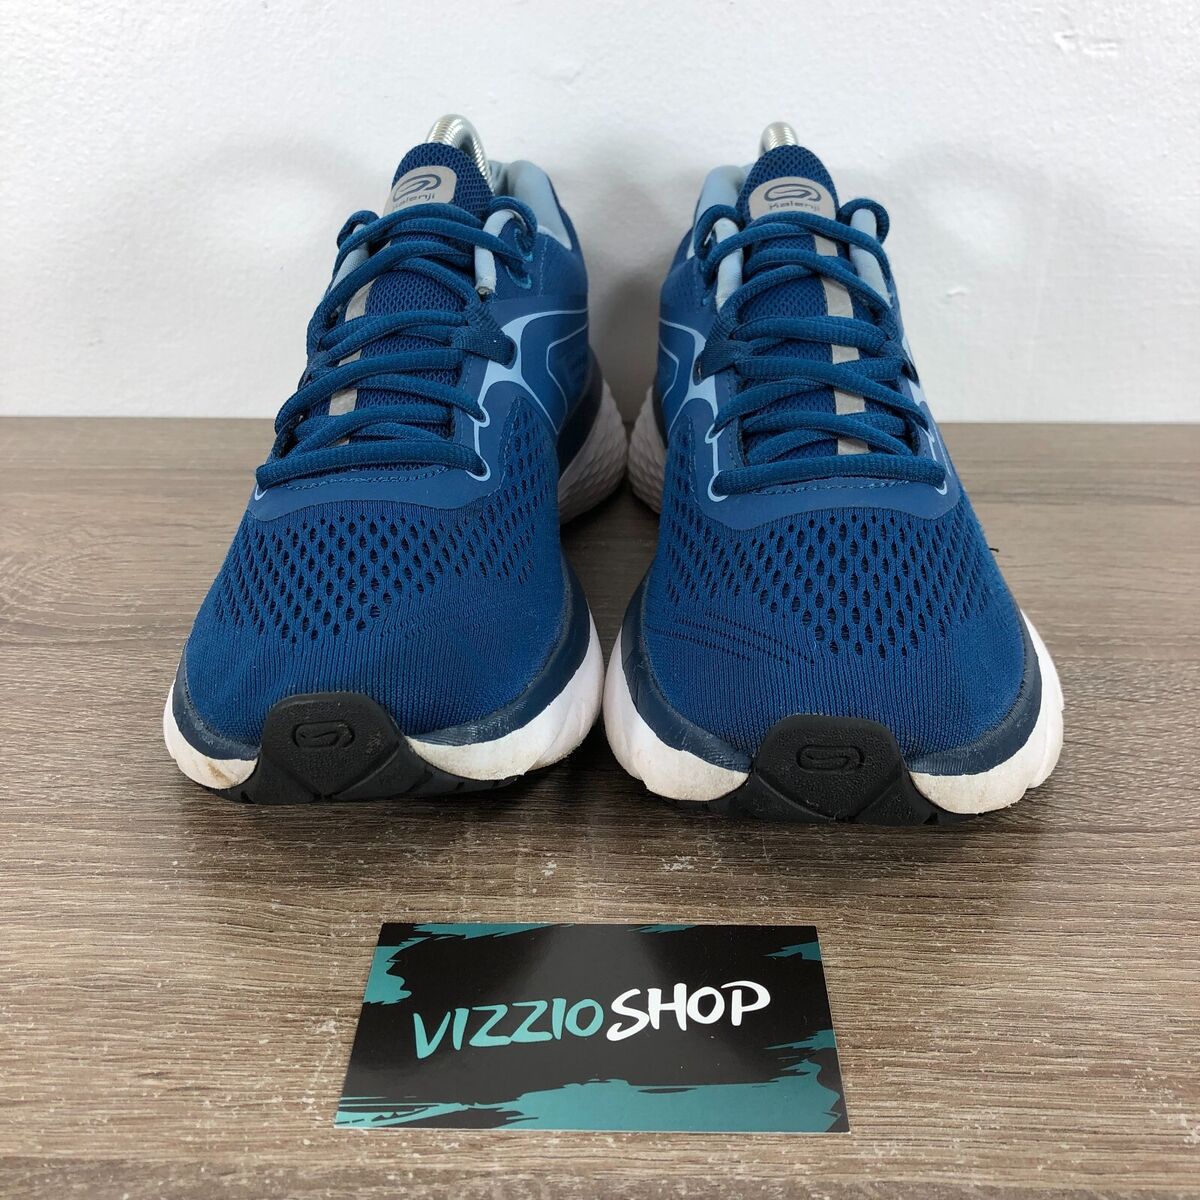 Kalenji 4 by Decathlon Low Top Lace Up Blue Shoes | eBay